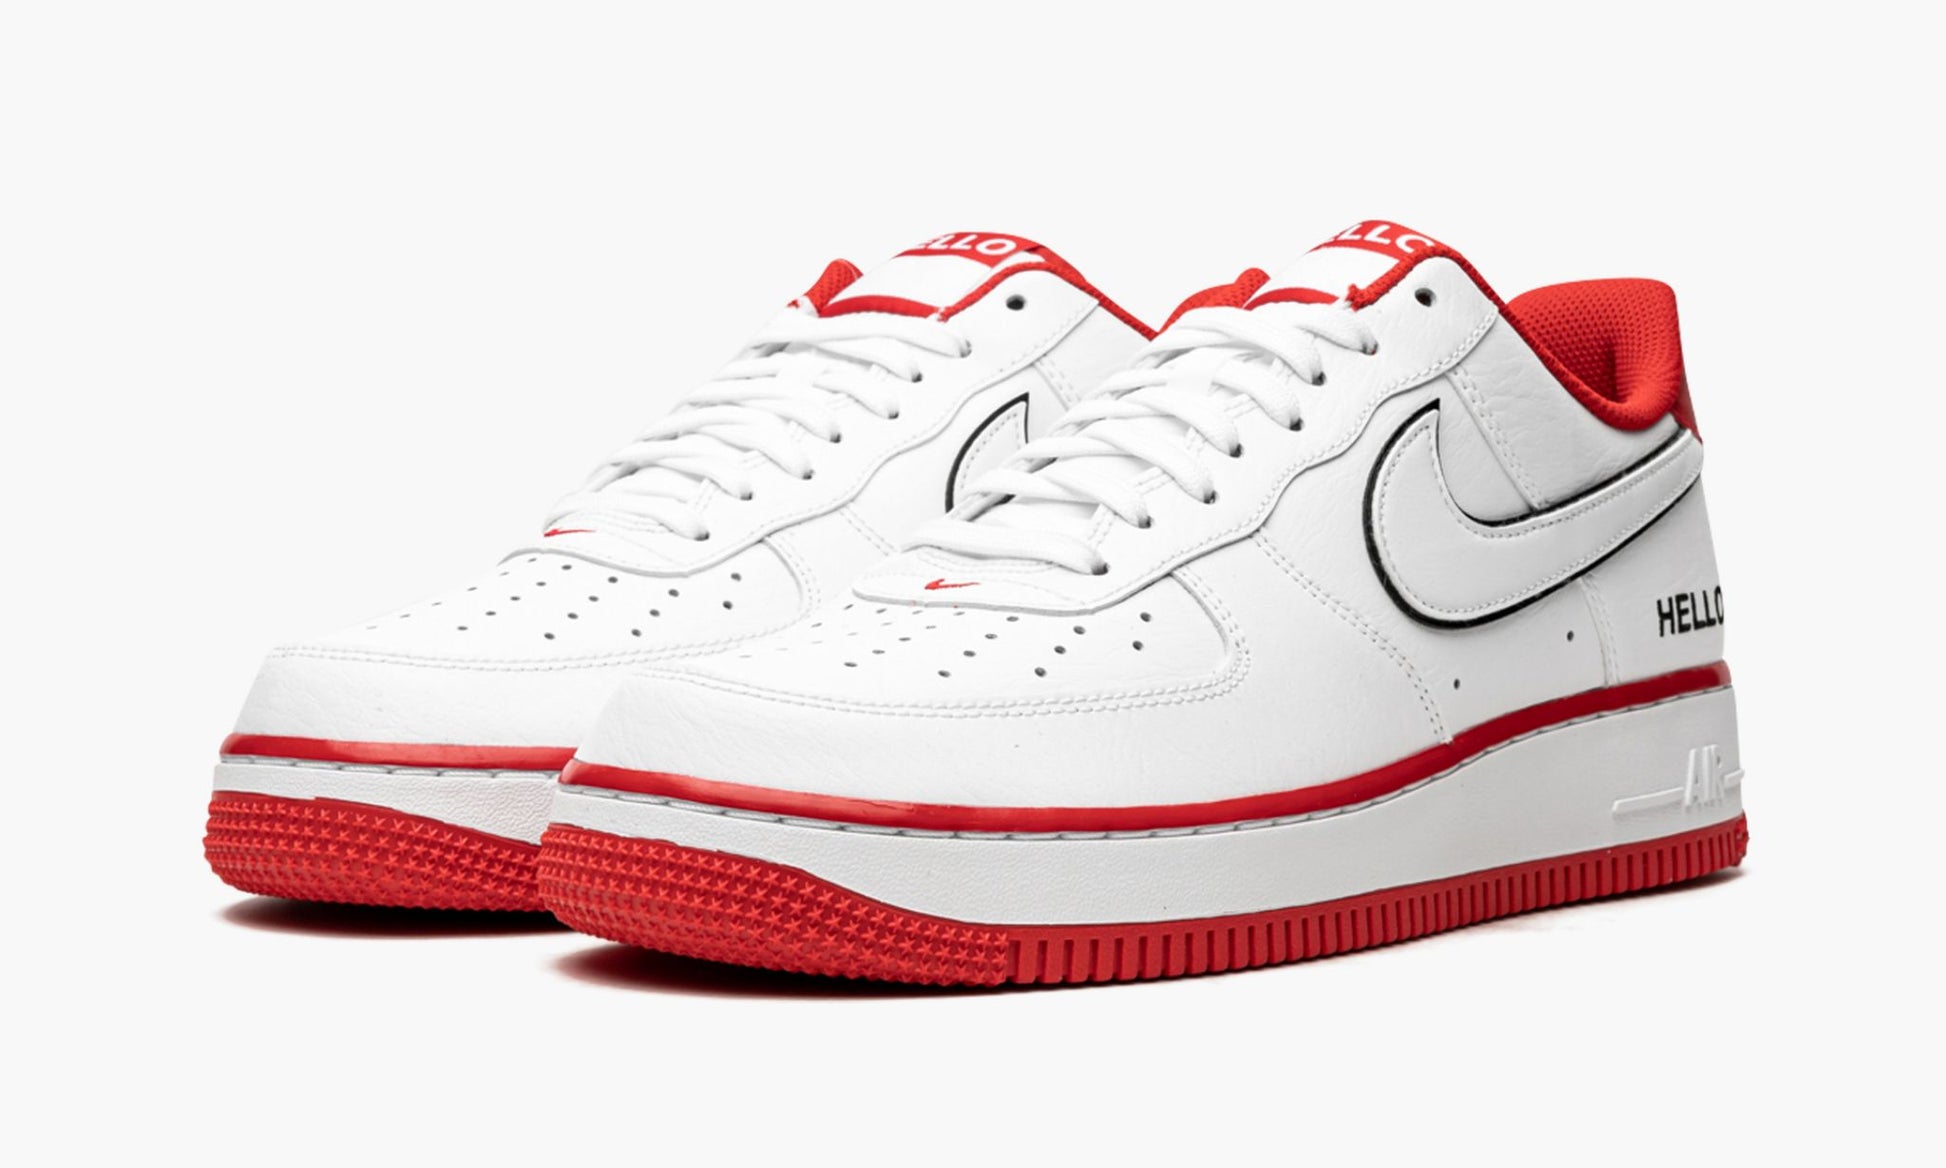 Air Force 1 Low '07 LX "Hello"